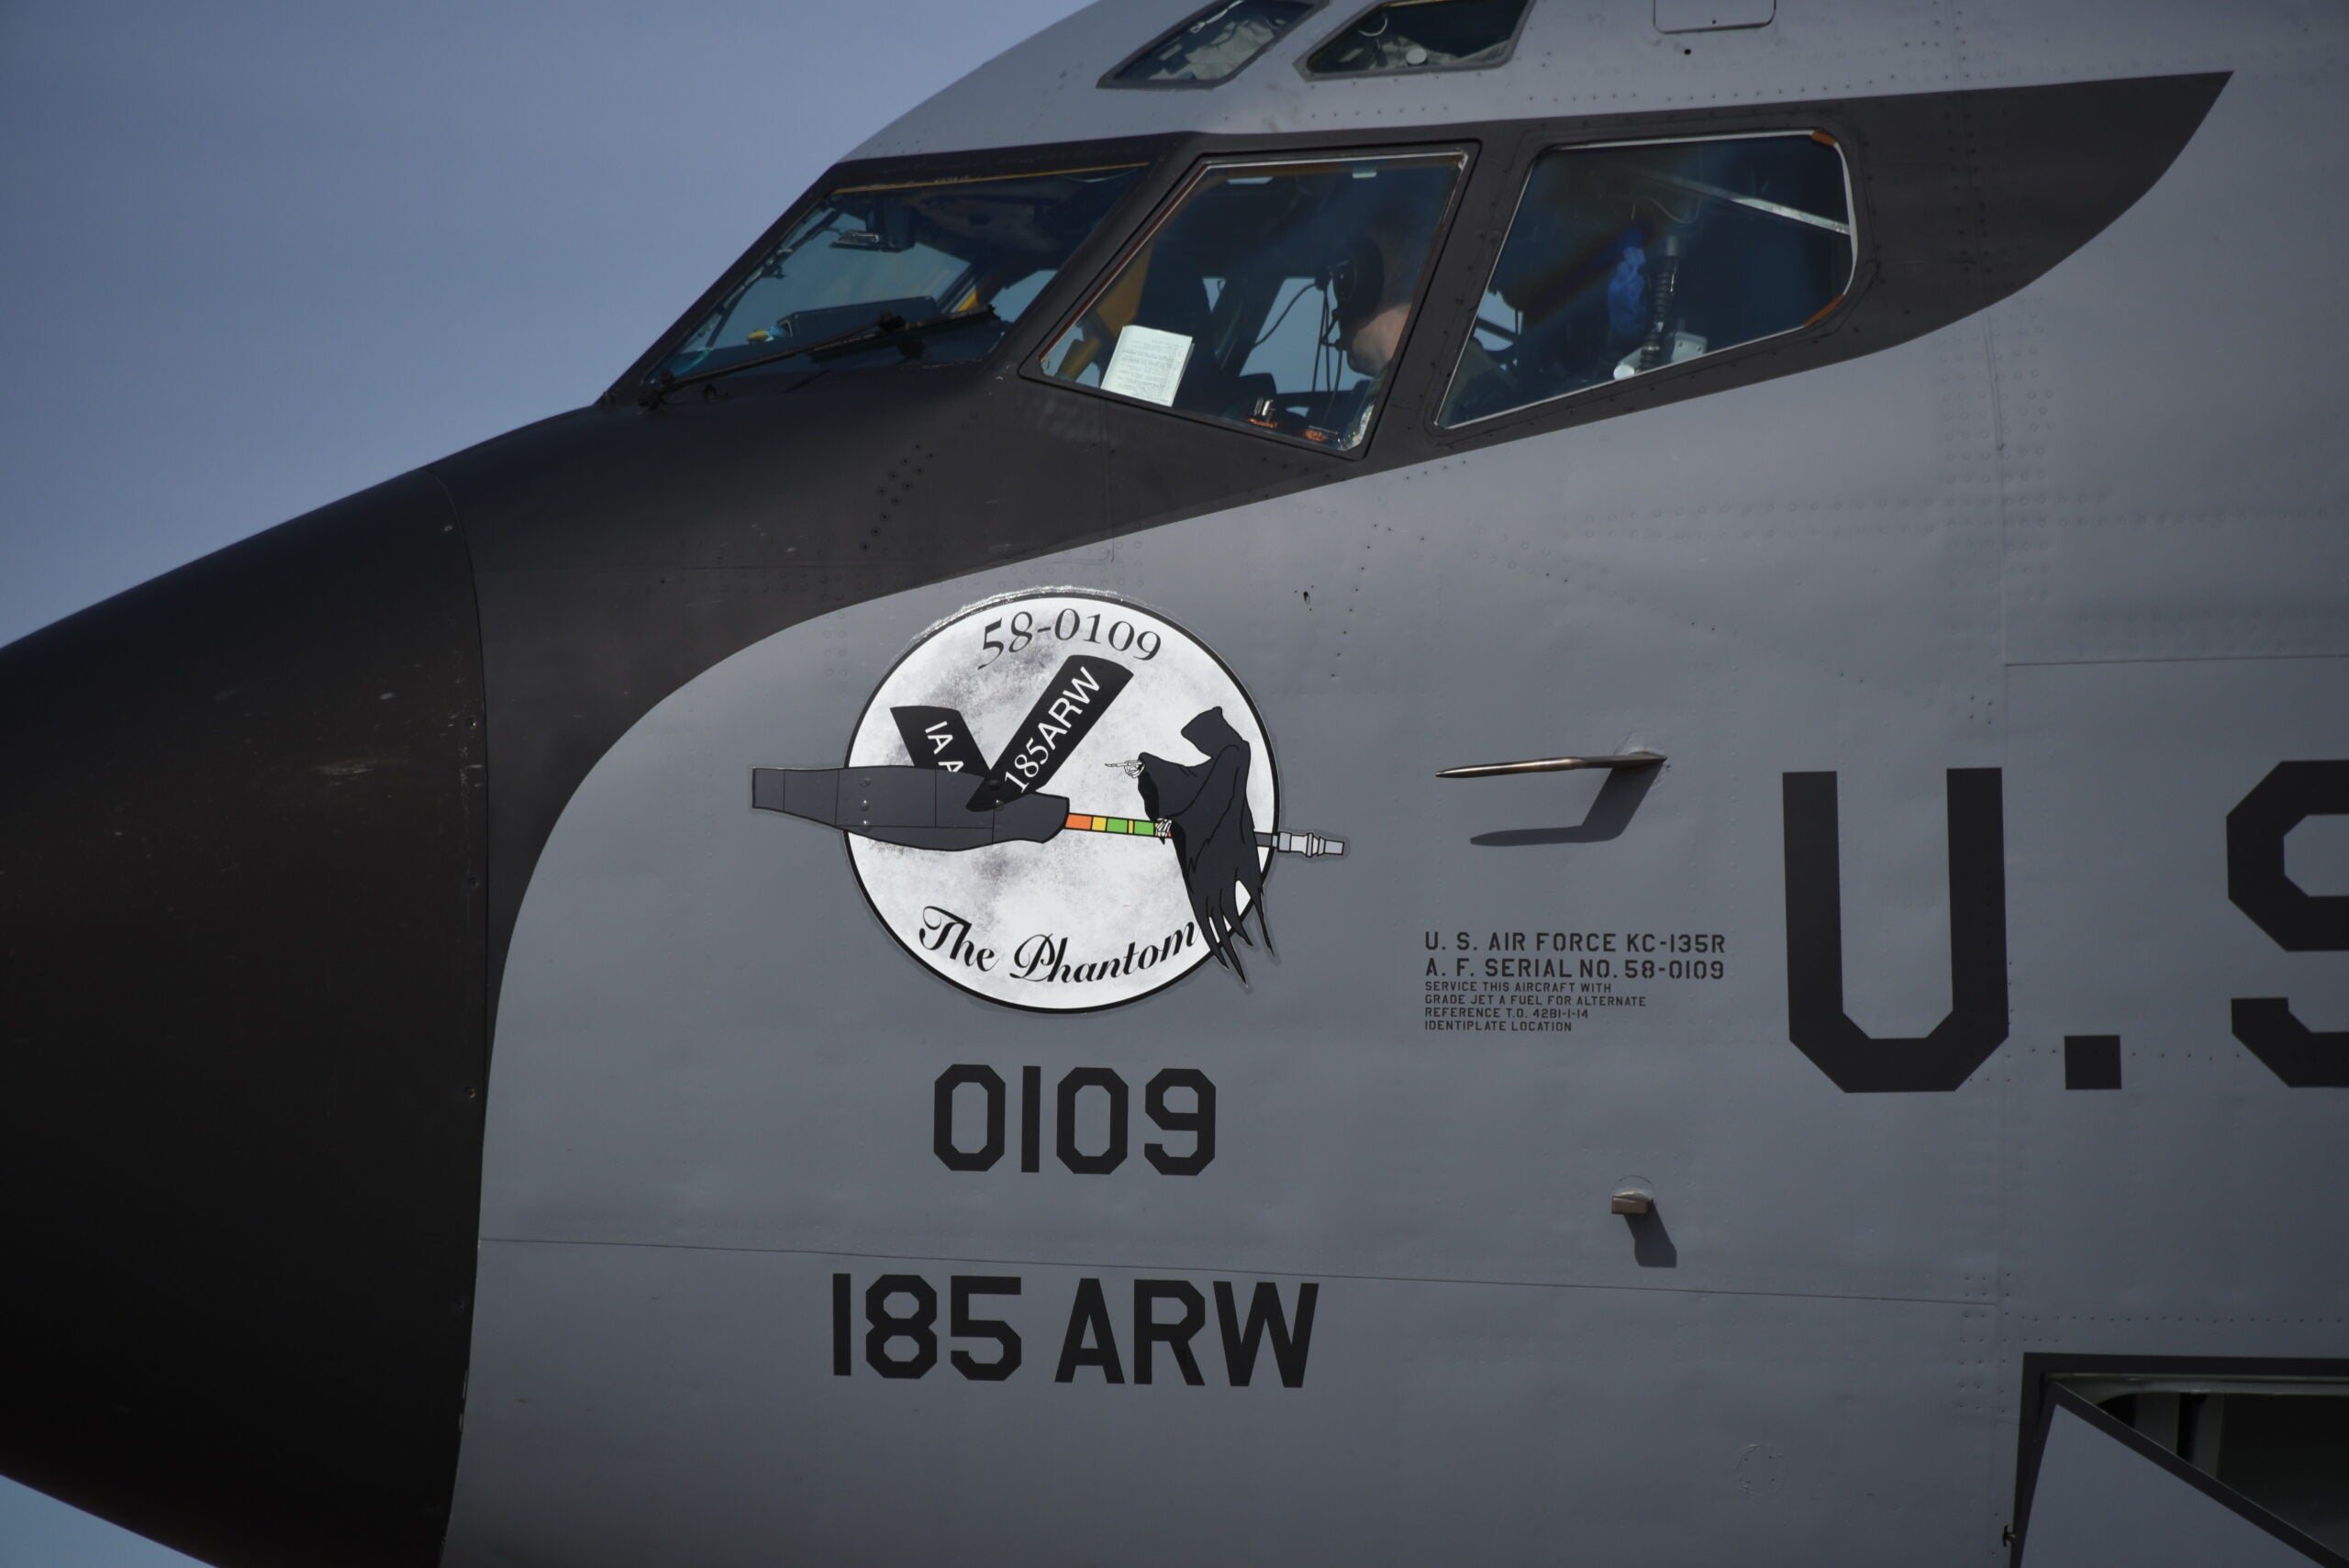 A U.S. Air Force KC-135 tail number 58-0109 with the nickname “Phantom 109” assigned to the Iowa Air National Guard is on the ramp in Sioux City, Iowa on October 28, 2021. 185th Crew Chiefs recently added new nose art to the aircraft depicting a phantom riding along on a KC-135 boom.

U.S. Air National Guard photo Senior Master Sgt. Vincent De Groot